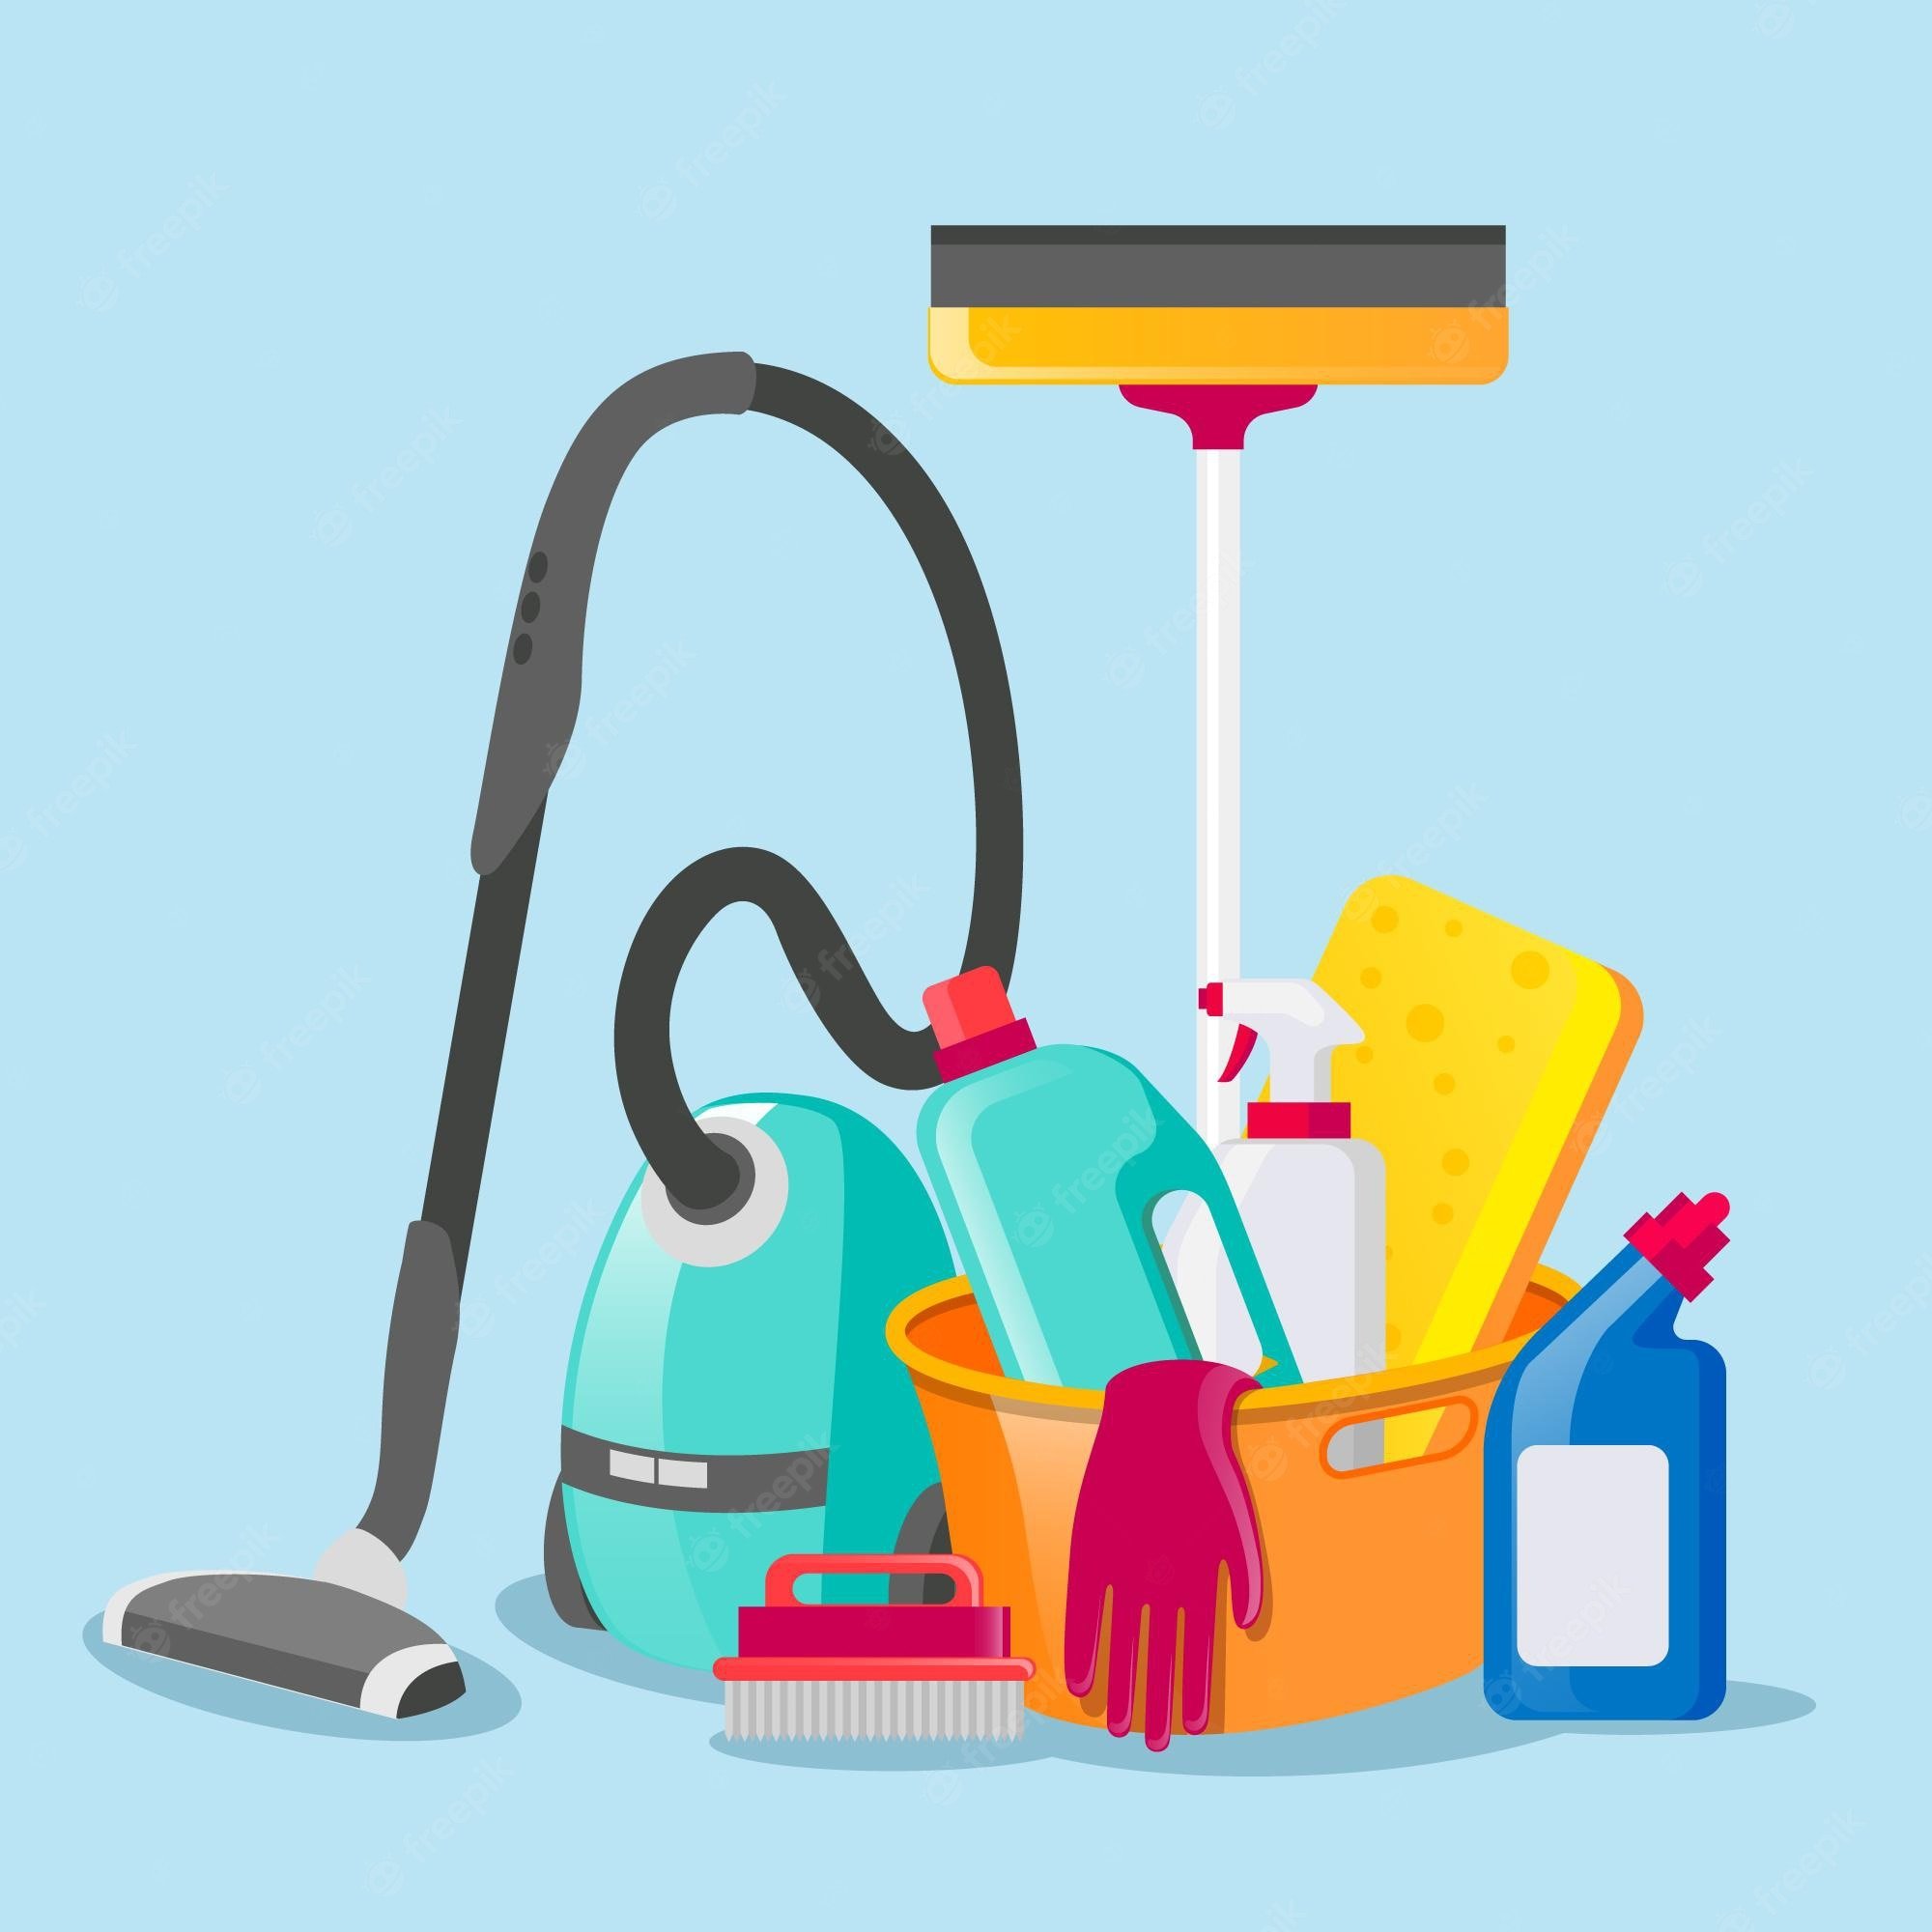 House Cleaning Image. Free Vectors, & PSD